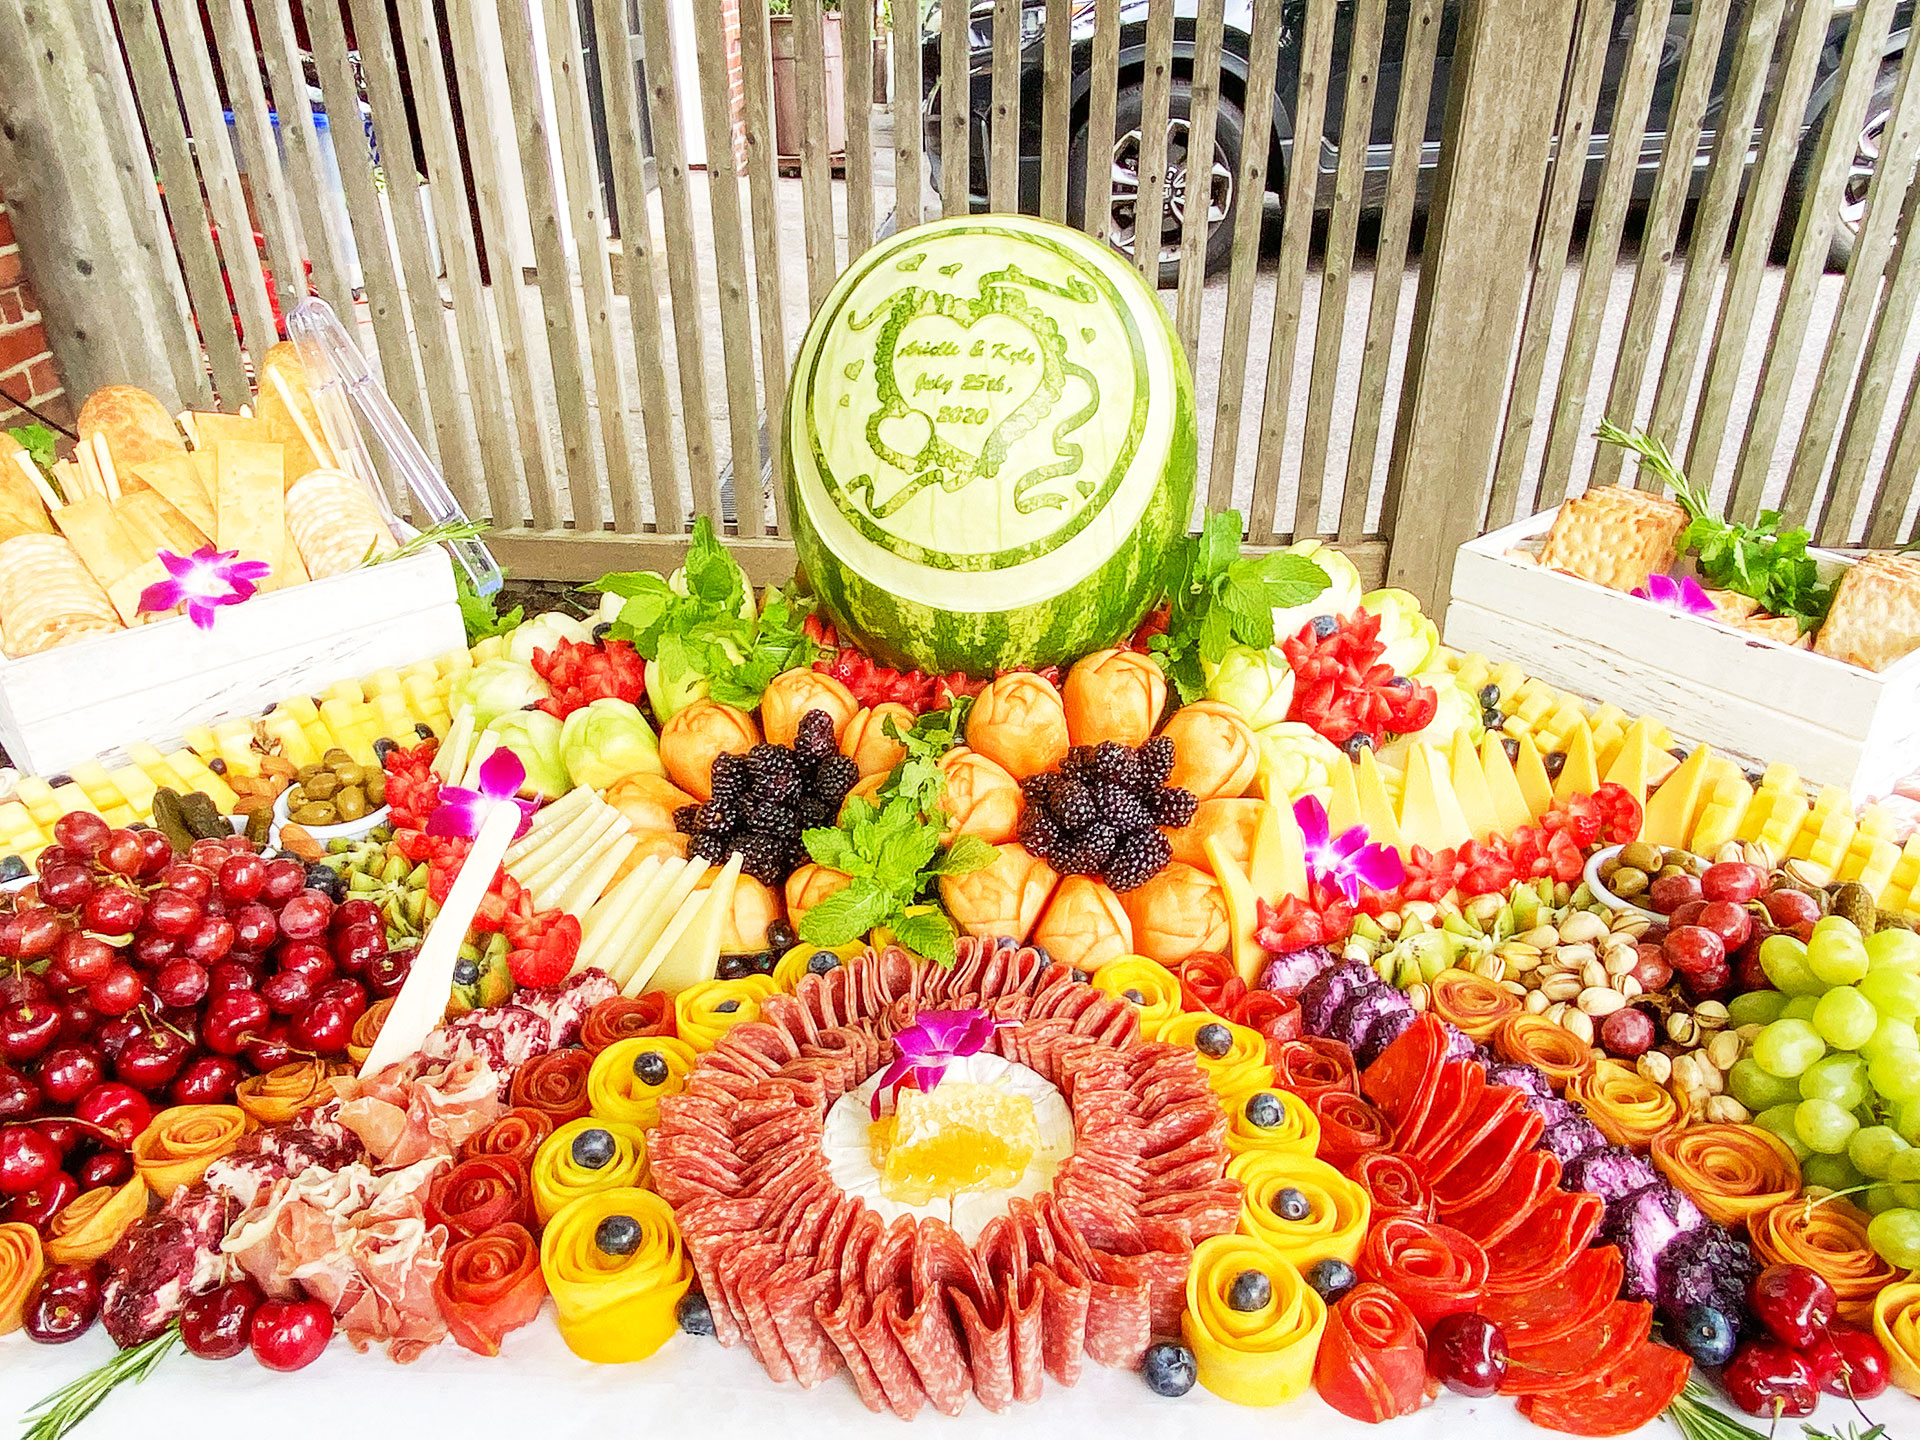 Fruit cheese and charcuterie grazing table with watermelon carving centerpiece